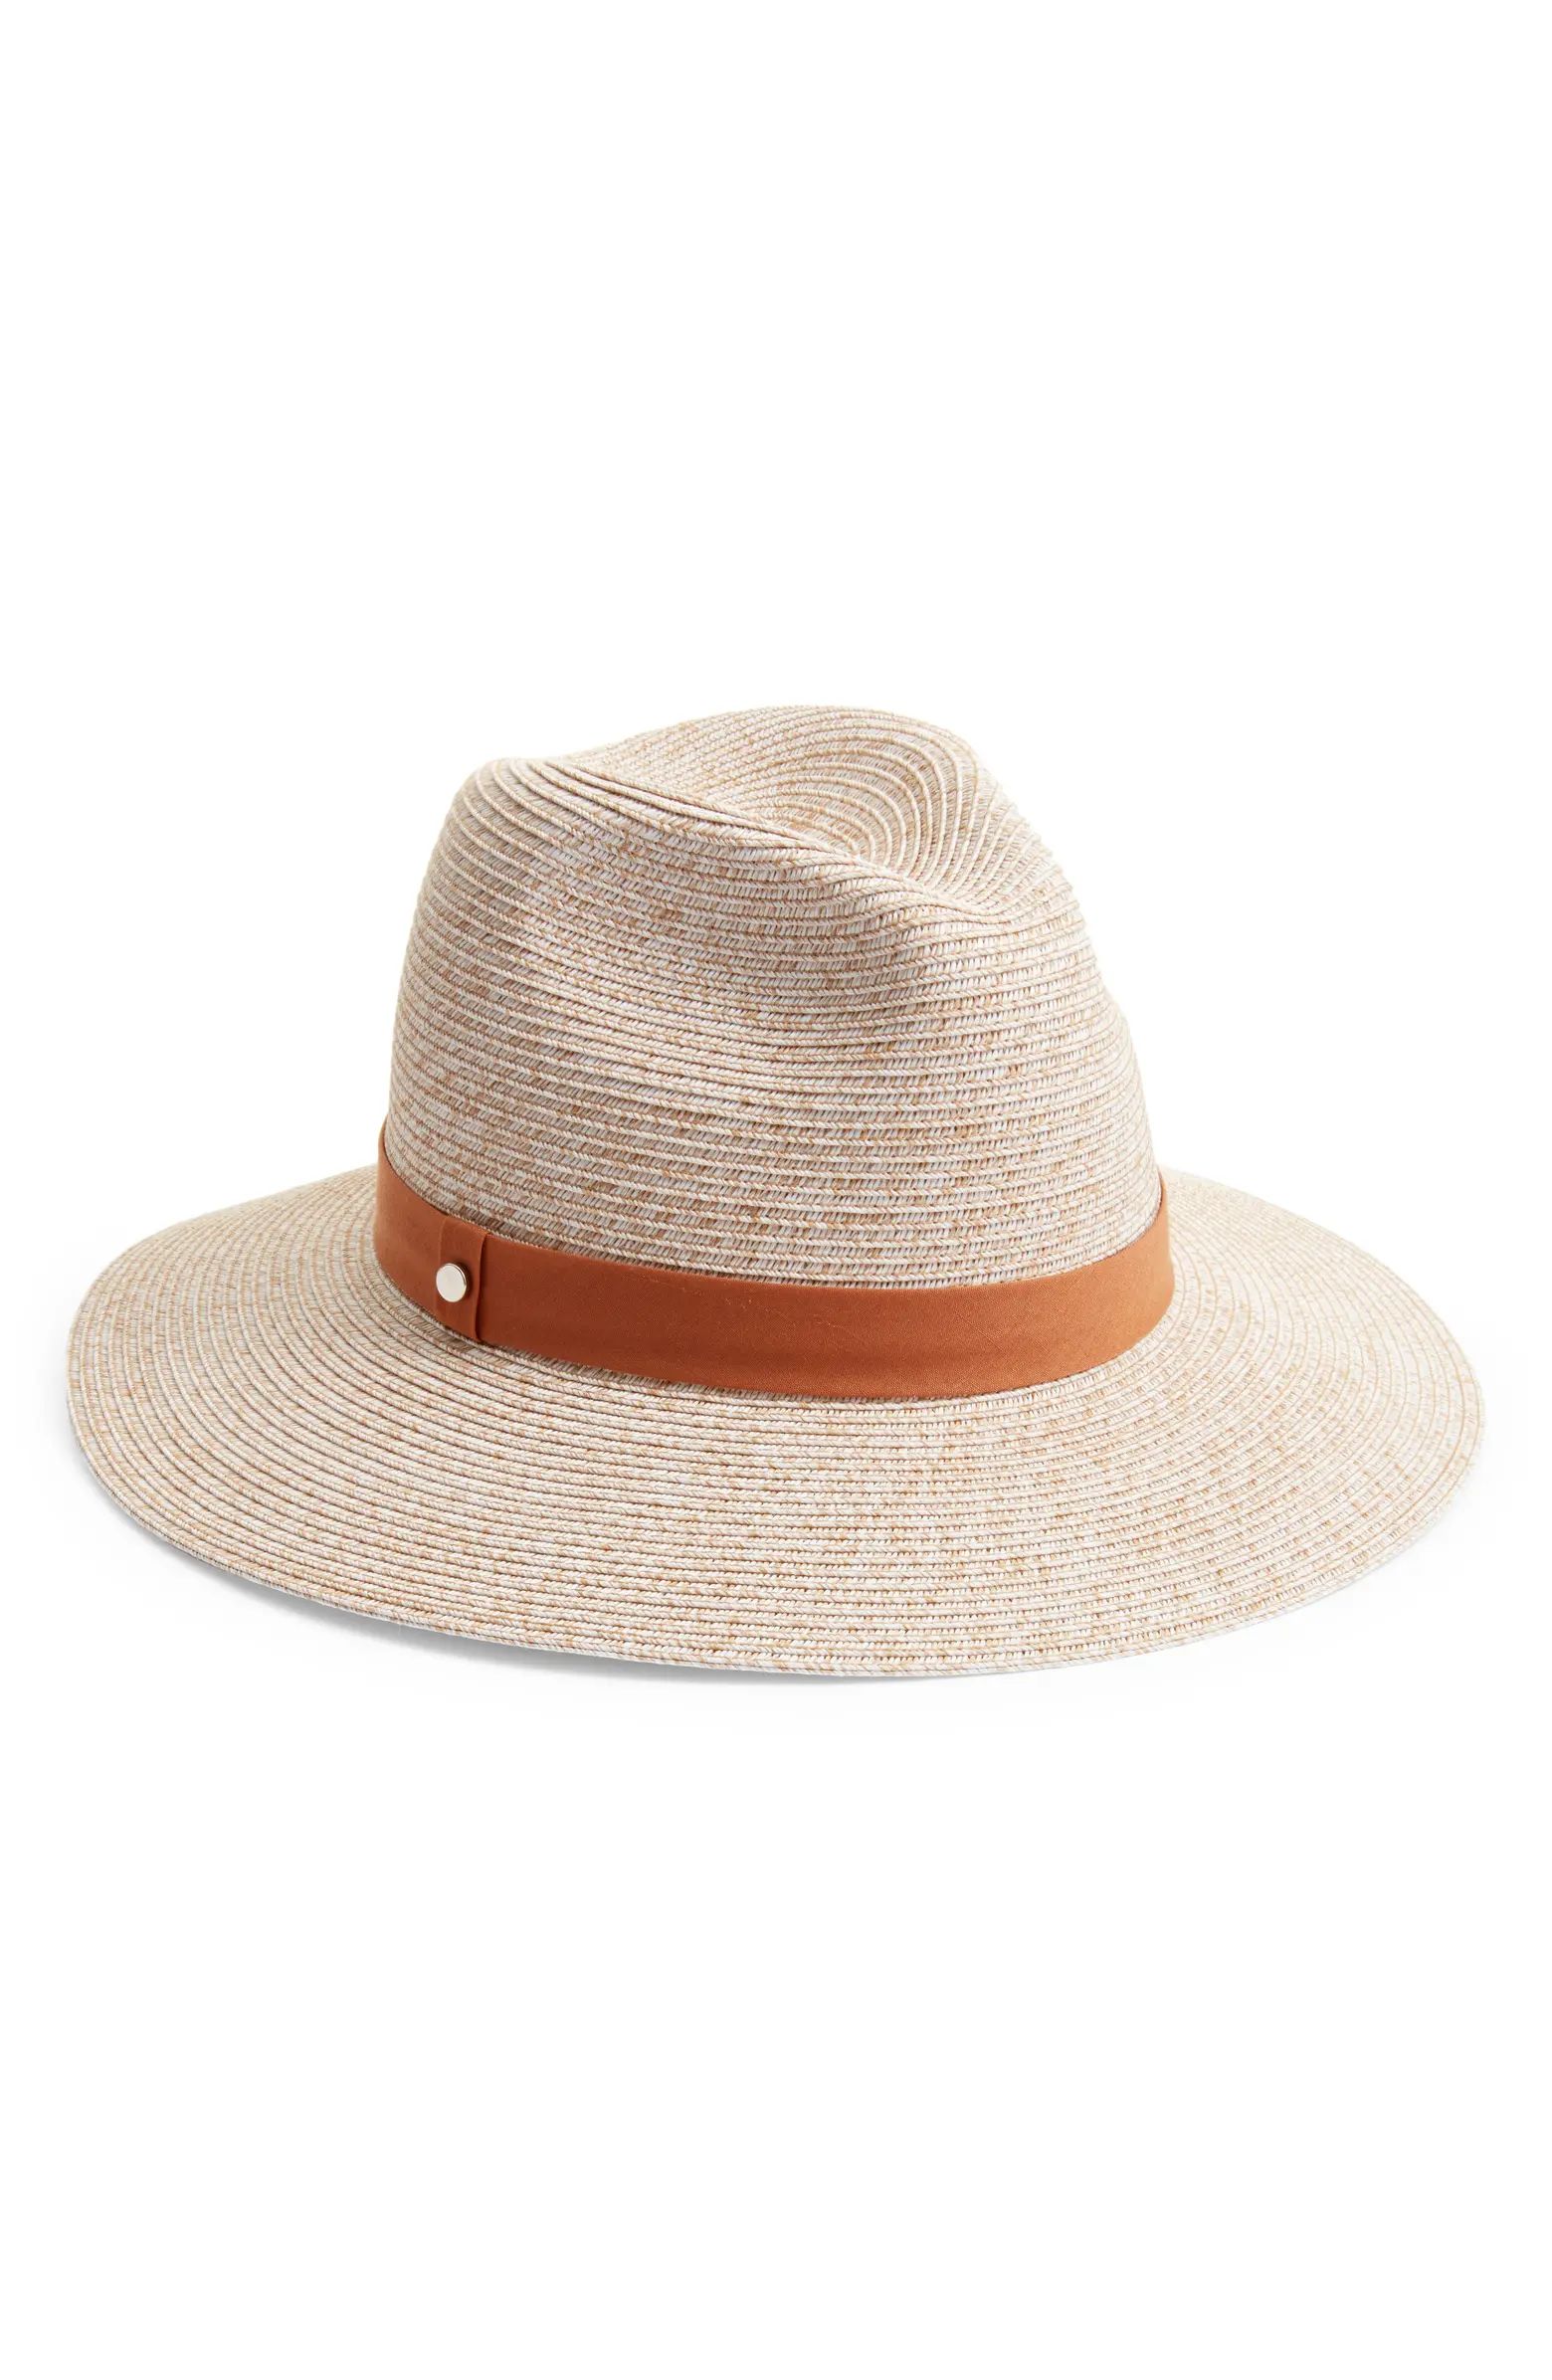 Nordstrom Packable Braided Paper Straw Panama Hat | Nordstrom | Nordstrom